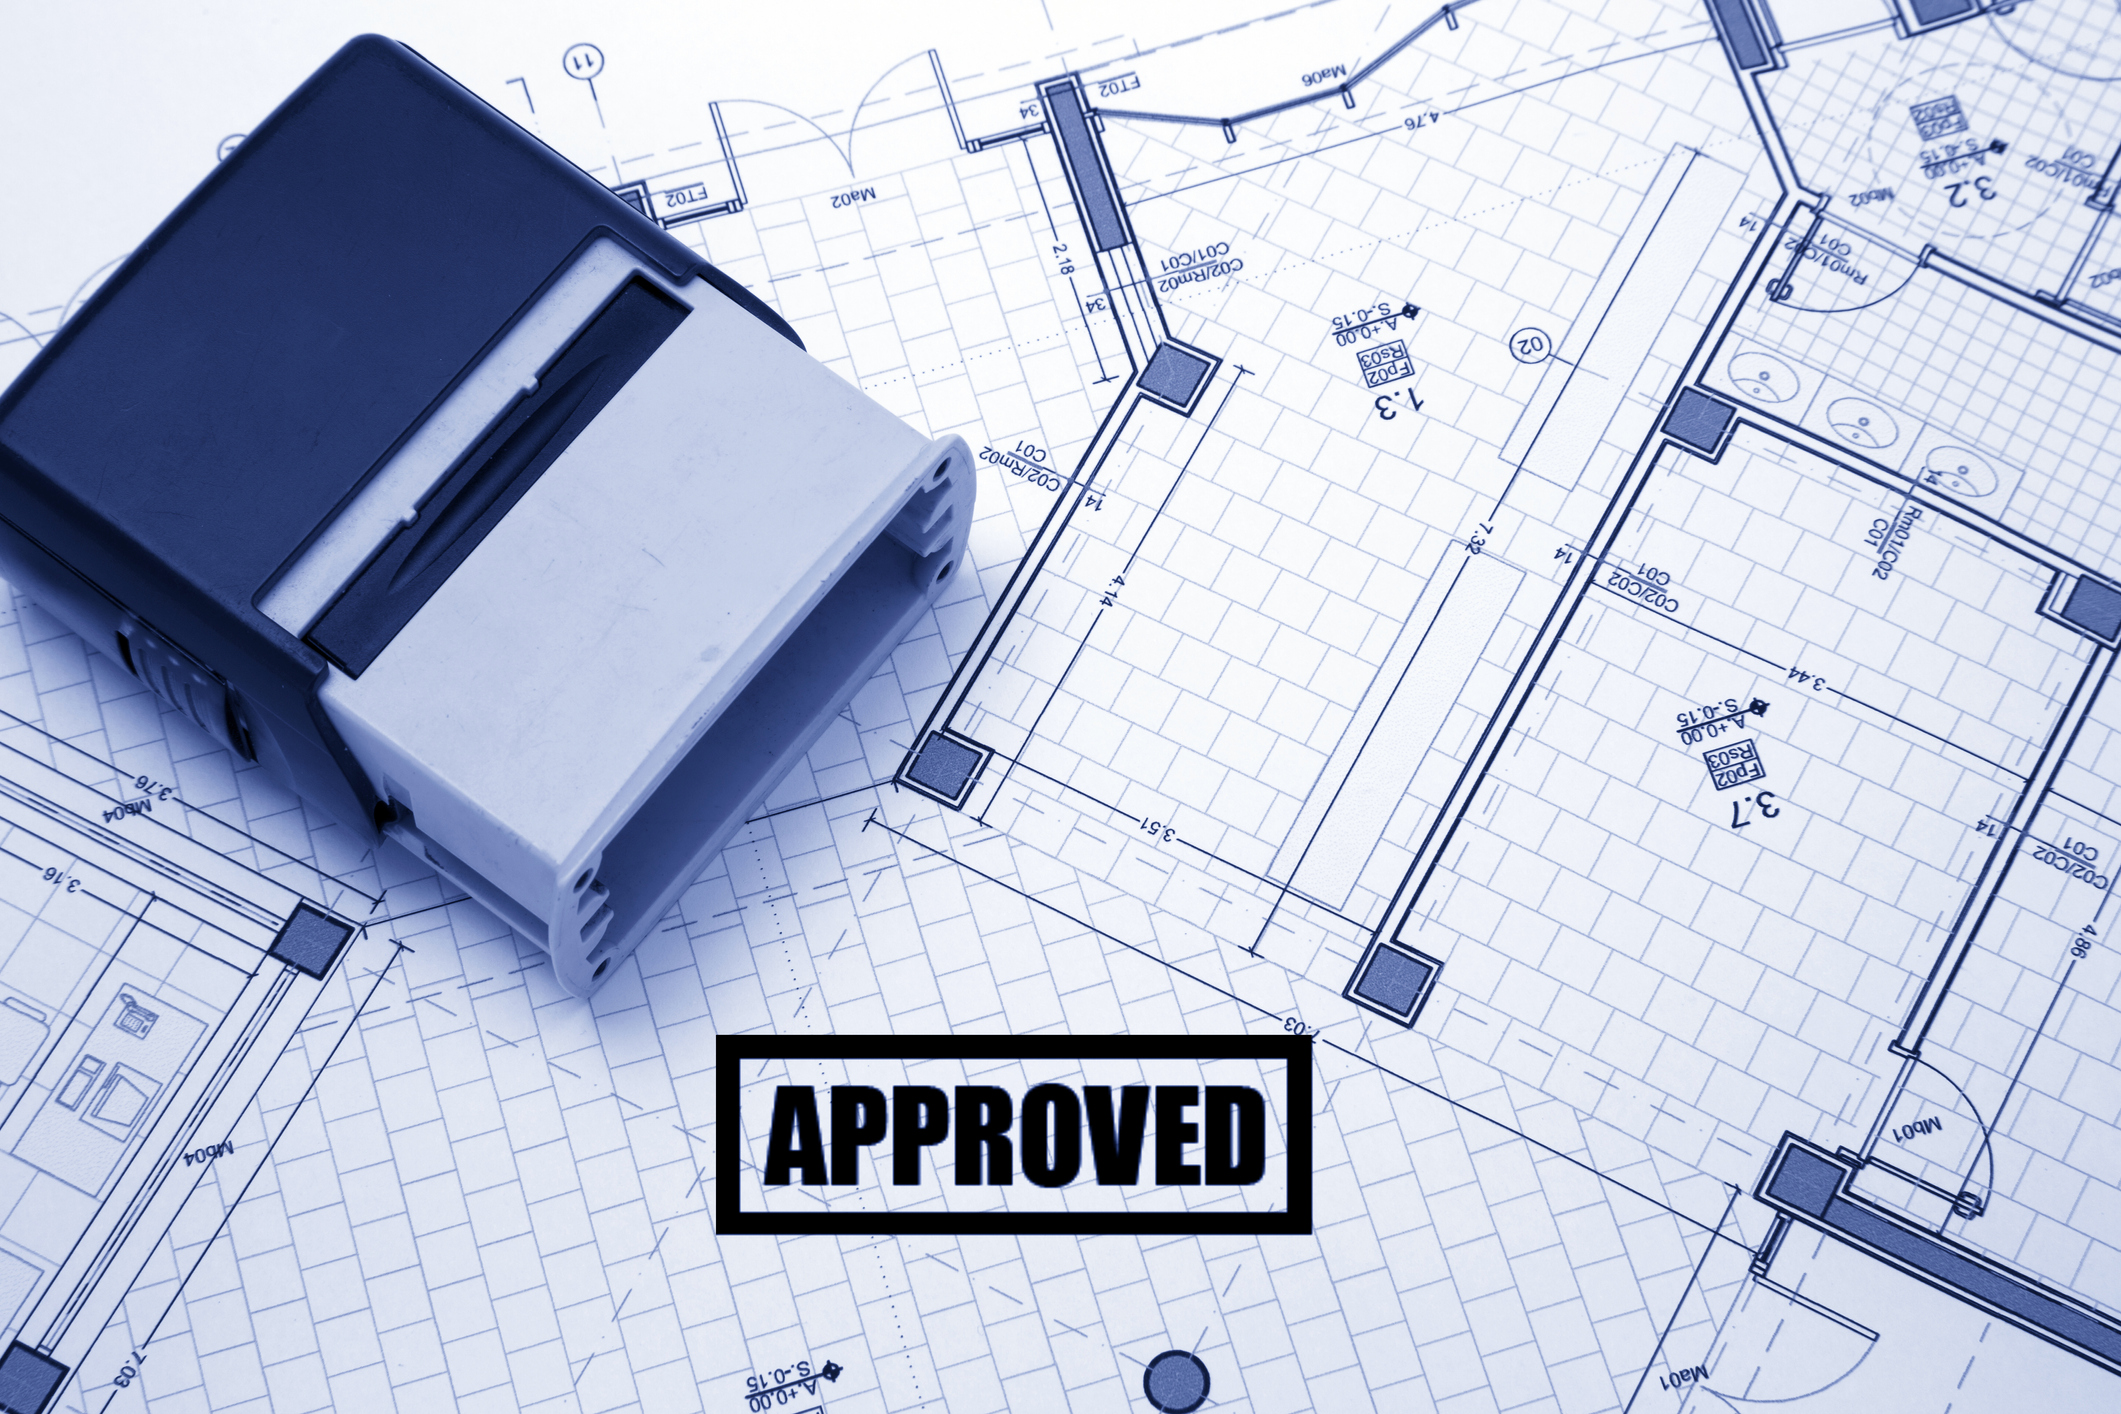 Planning permission approval